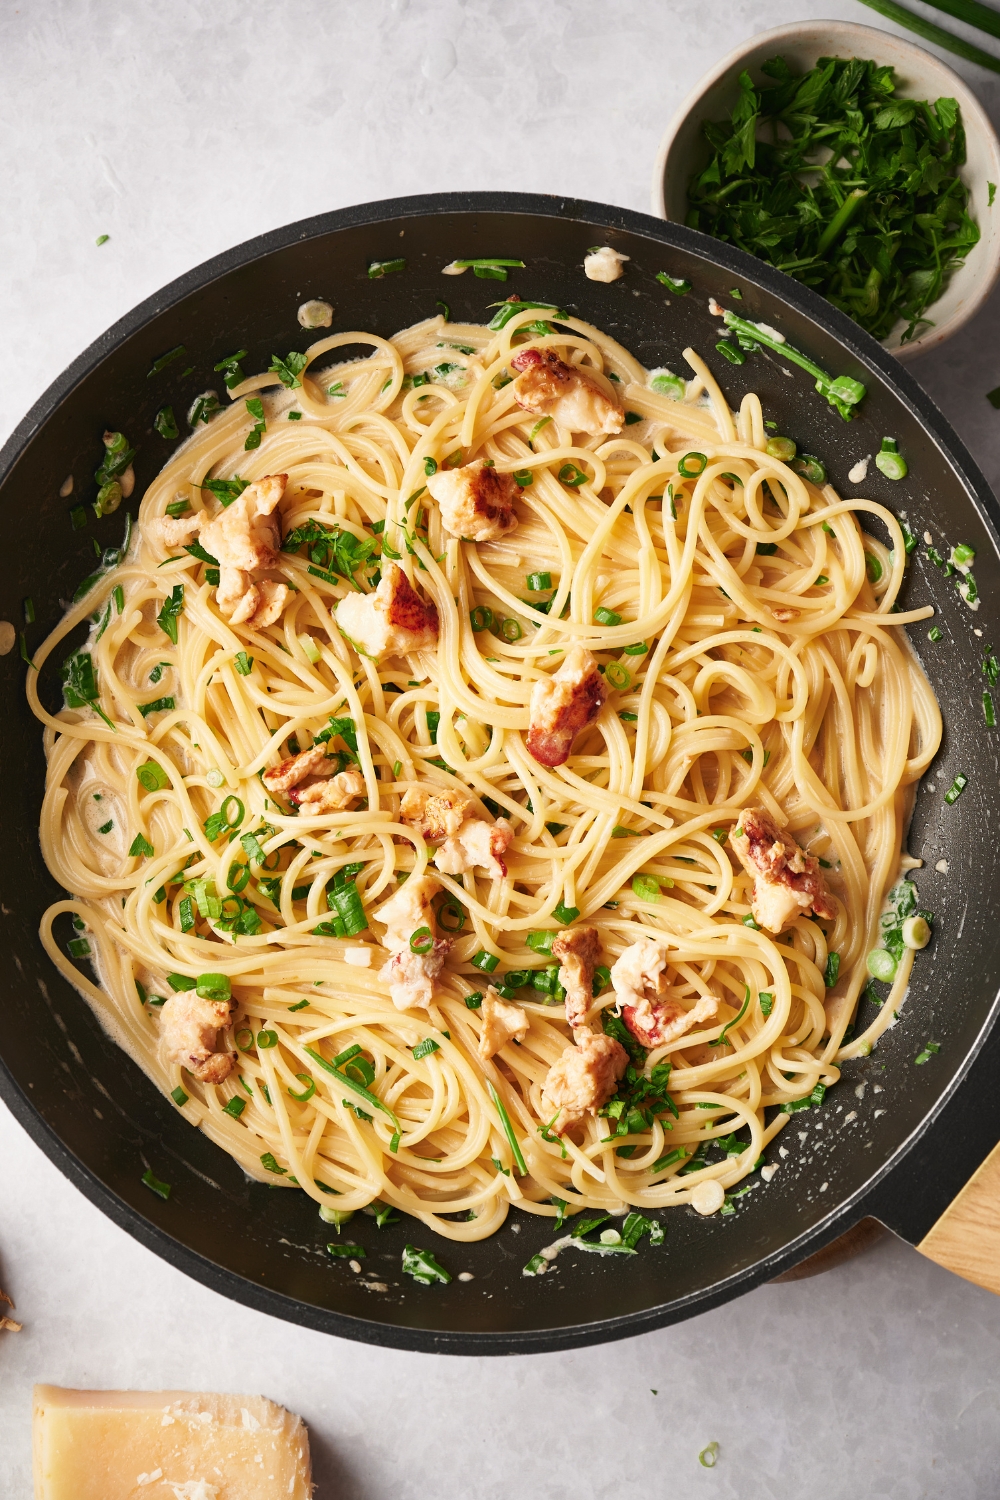 A skillet with cooked spaghetti and lobster meat in a cream sauce garnished with fresh herbs and green onion.